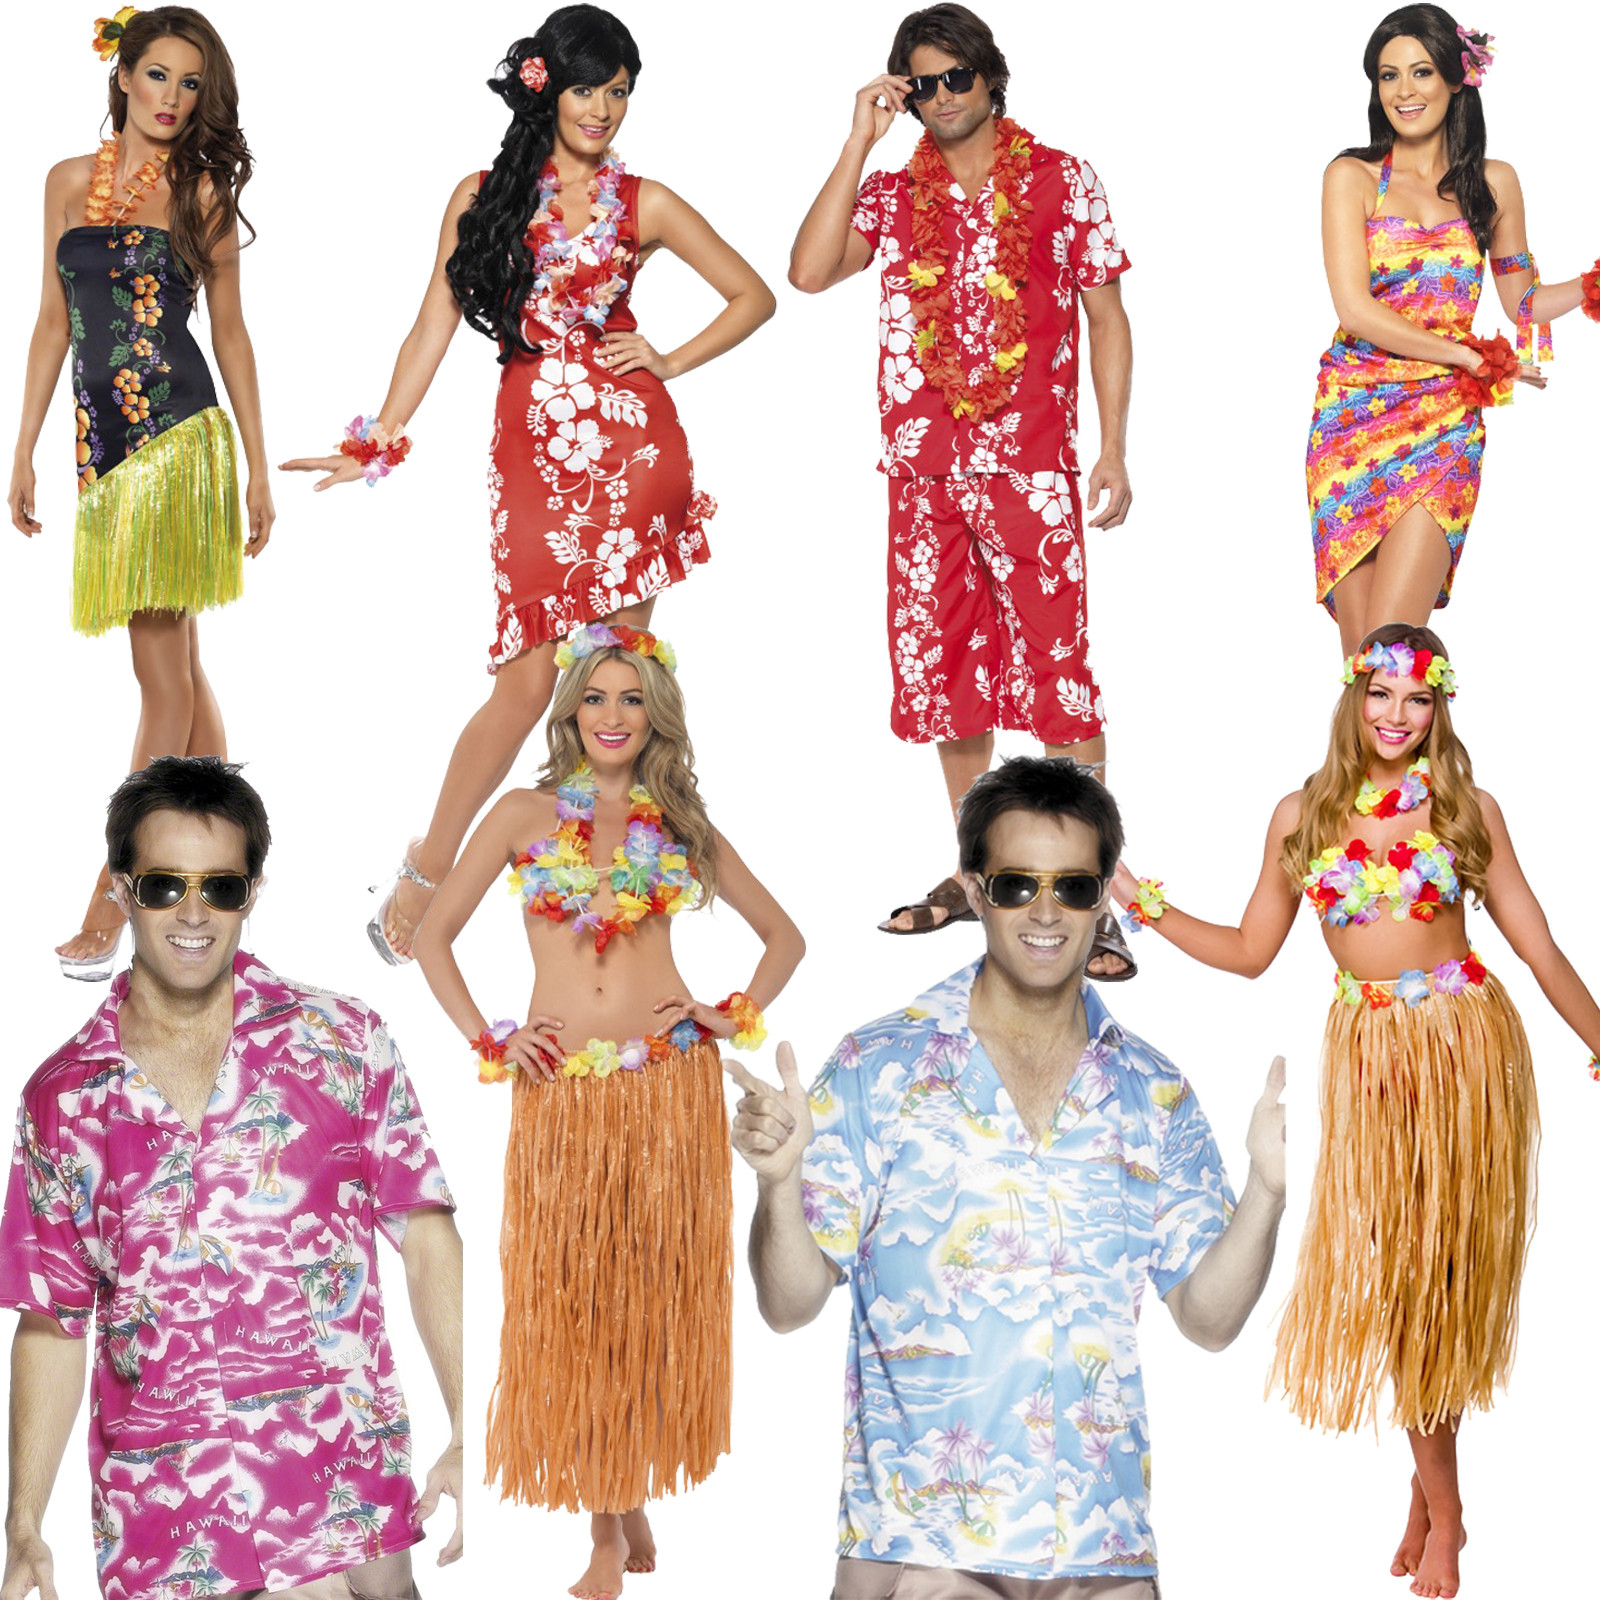 Summer Costume Party Ideas
 Image to Close